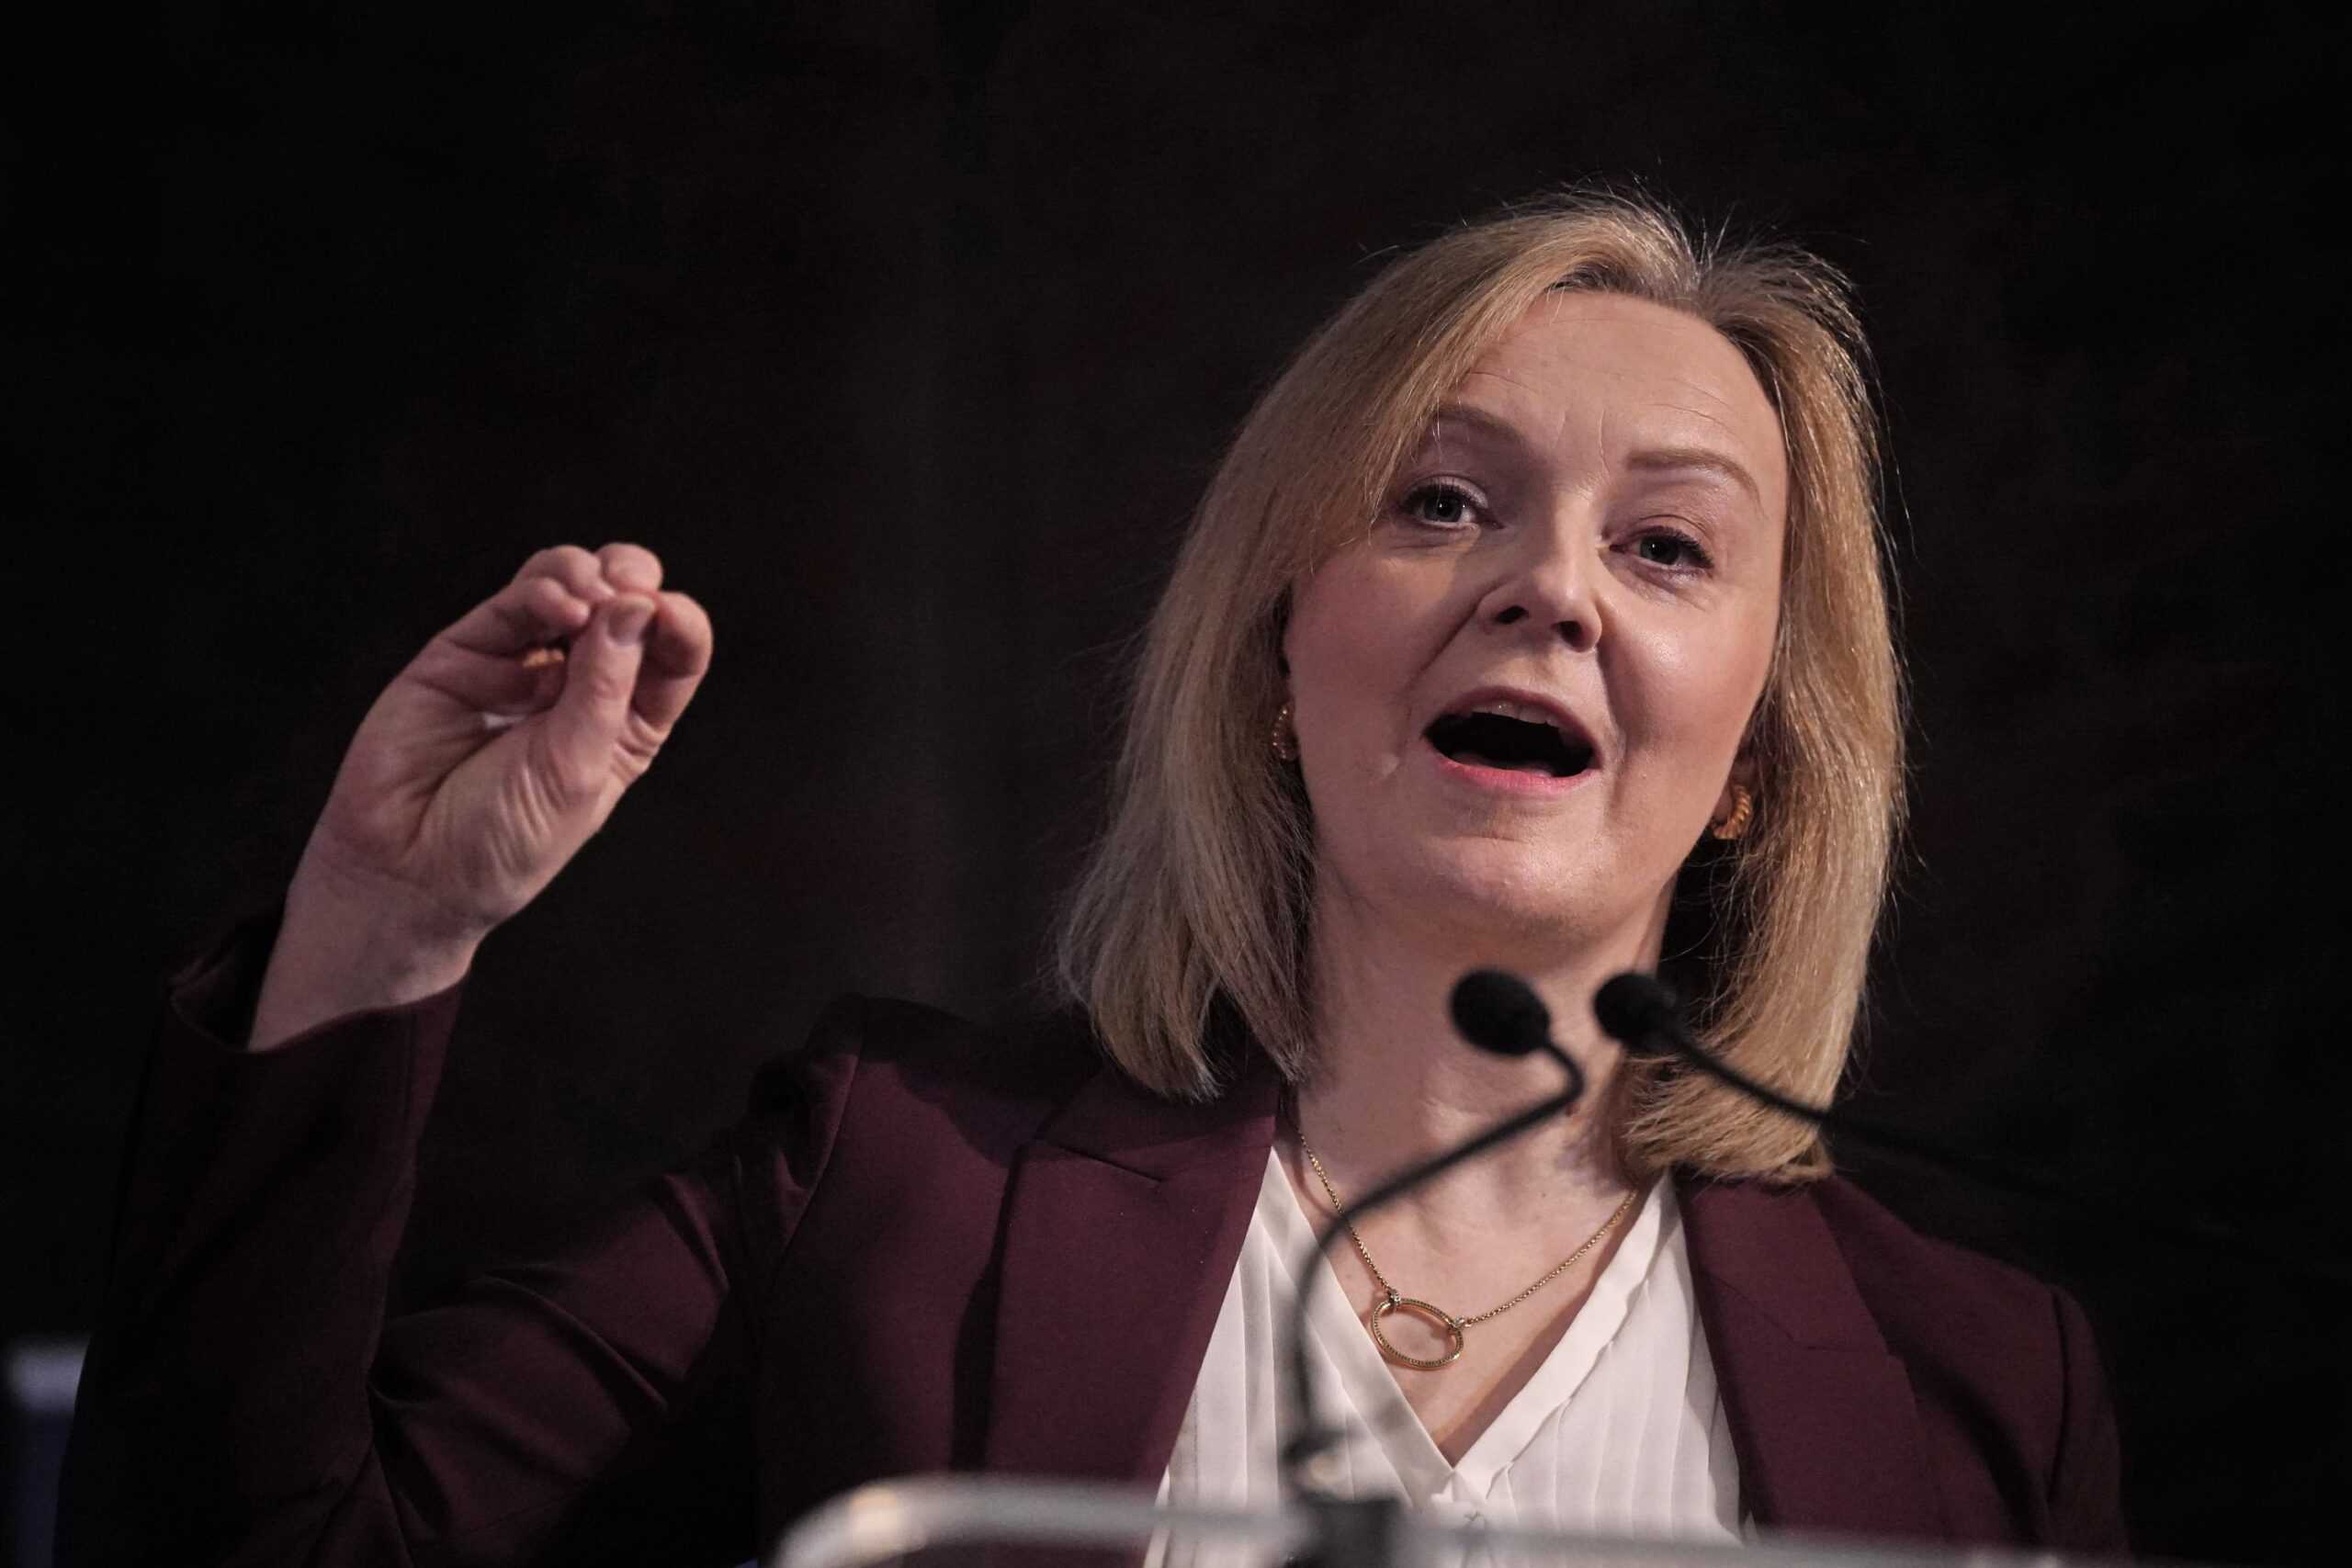 Liz Truss fumes about ‘having to do her own hair and make-up’ while PM